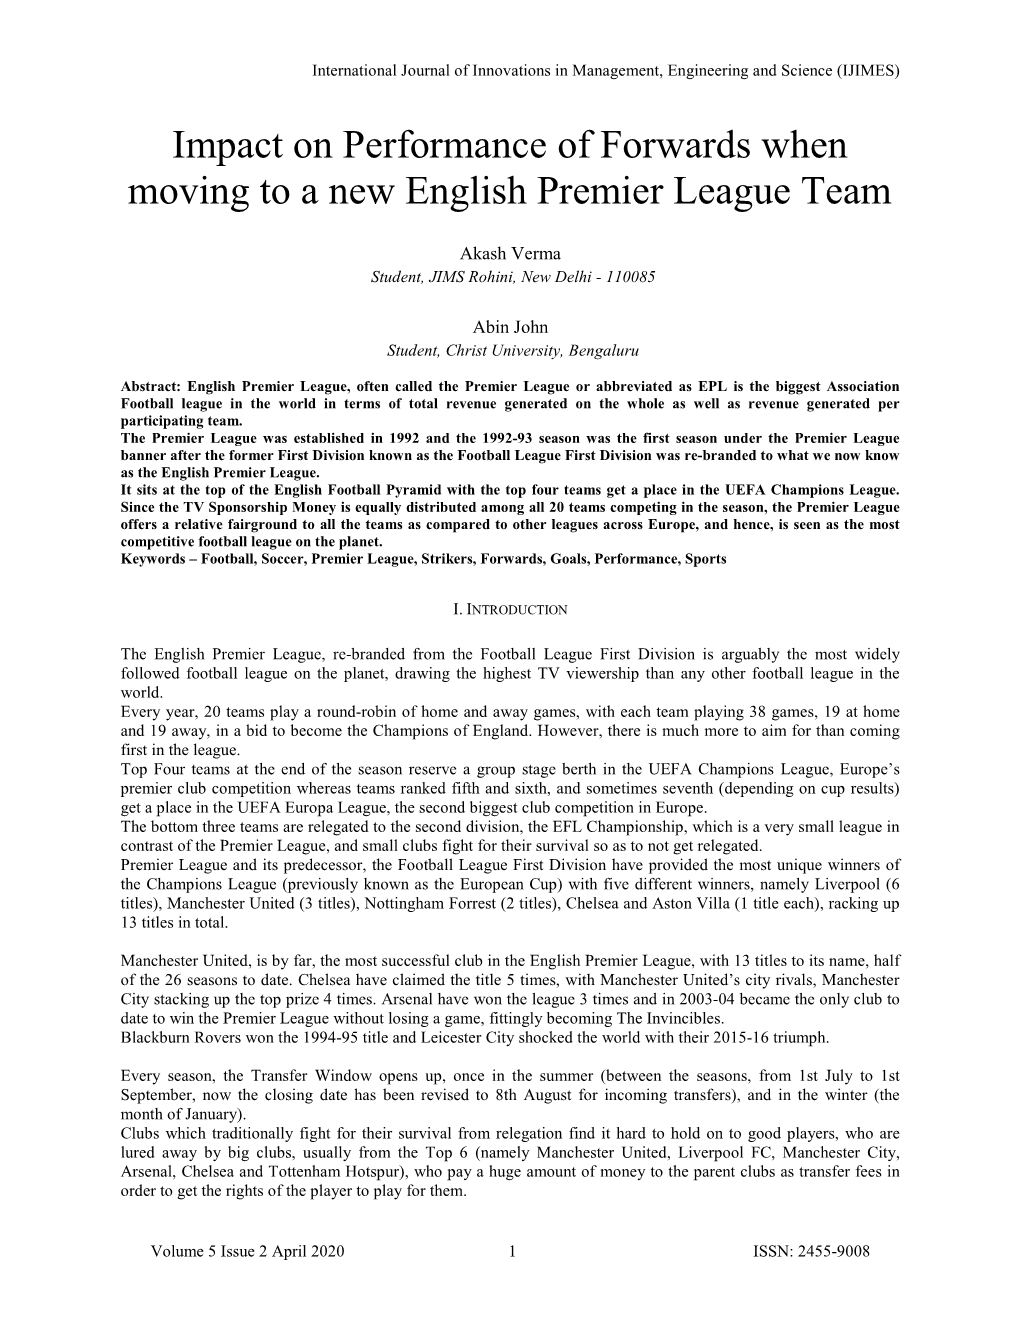 Impact on Performance of Forwards When Moving to a New English Premier League Team